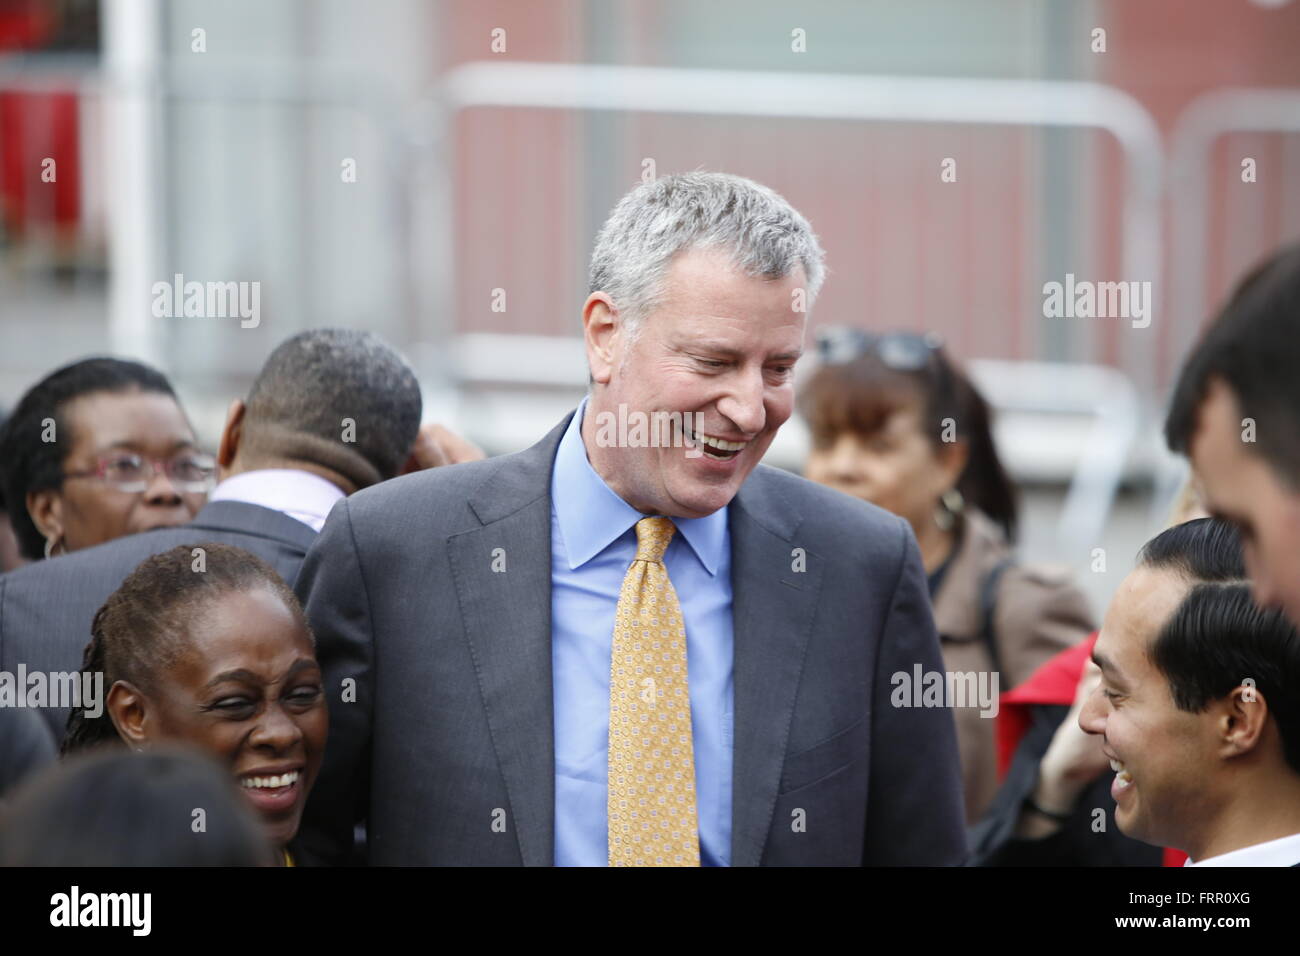 New York City, United States. 23rd Mar, 2016. Mayor de Blasio with Chirlane McCray chat with supporters after rally. Mayor de Blasio, Chirlane McCray, Melissa Mark-Viverito & HUD director Julian Castro highlighted a rally in Foley Square to celebrate passage of the city's new mandatory inclusionary zoning law to promote affordable housing © Andy Katz/Pacific Press/Alamy Live News Stock Photo